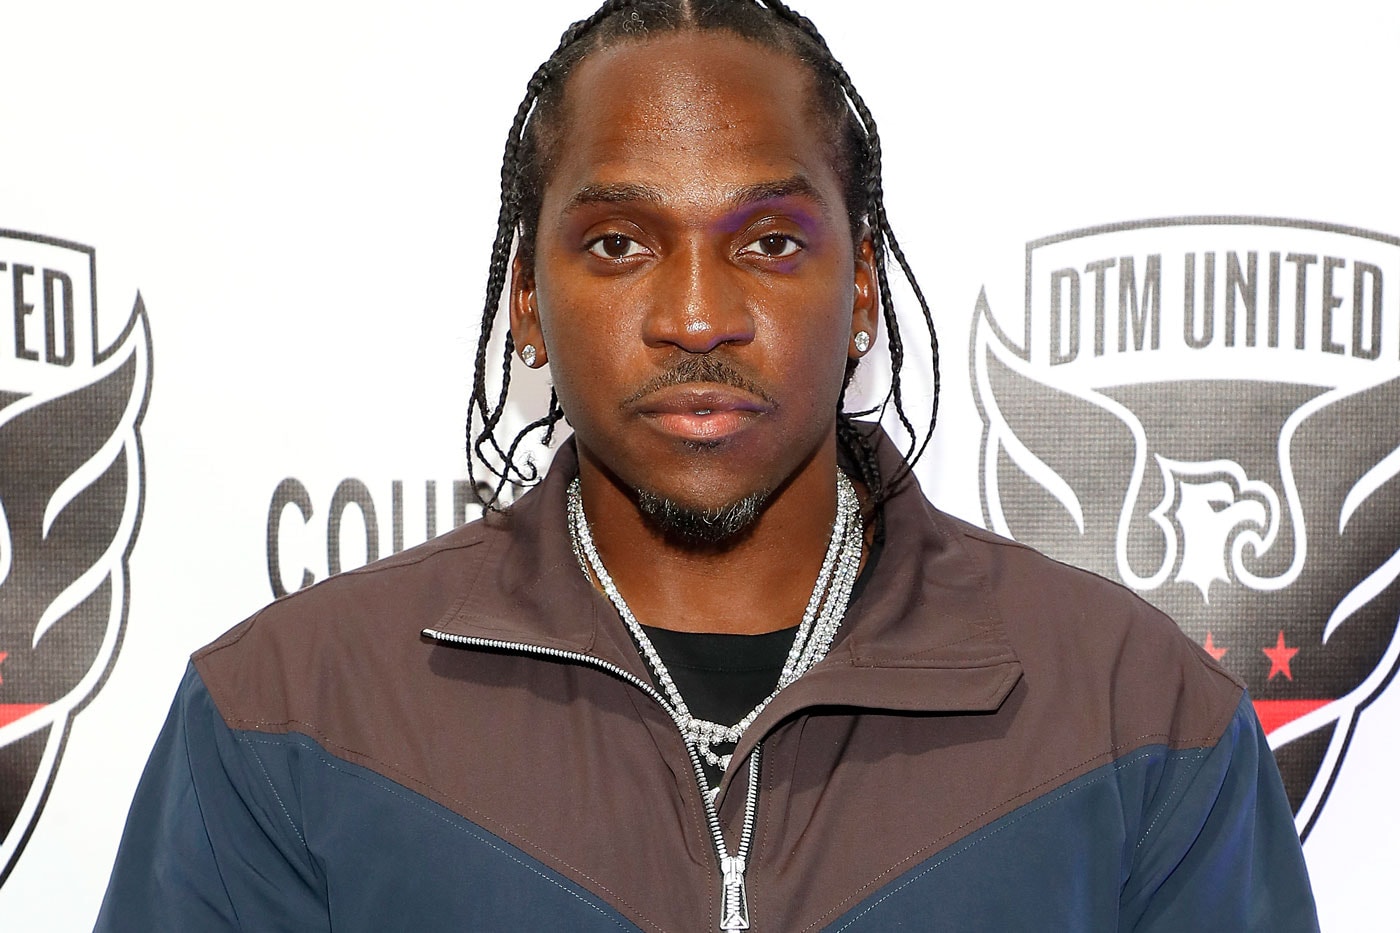 Pusha T Raps Alongside Sinning Nuns at a Carnival for "Crutches, Crosses, Caskets" Video